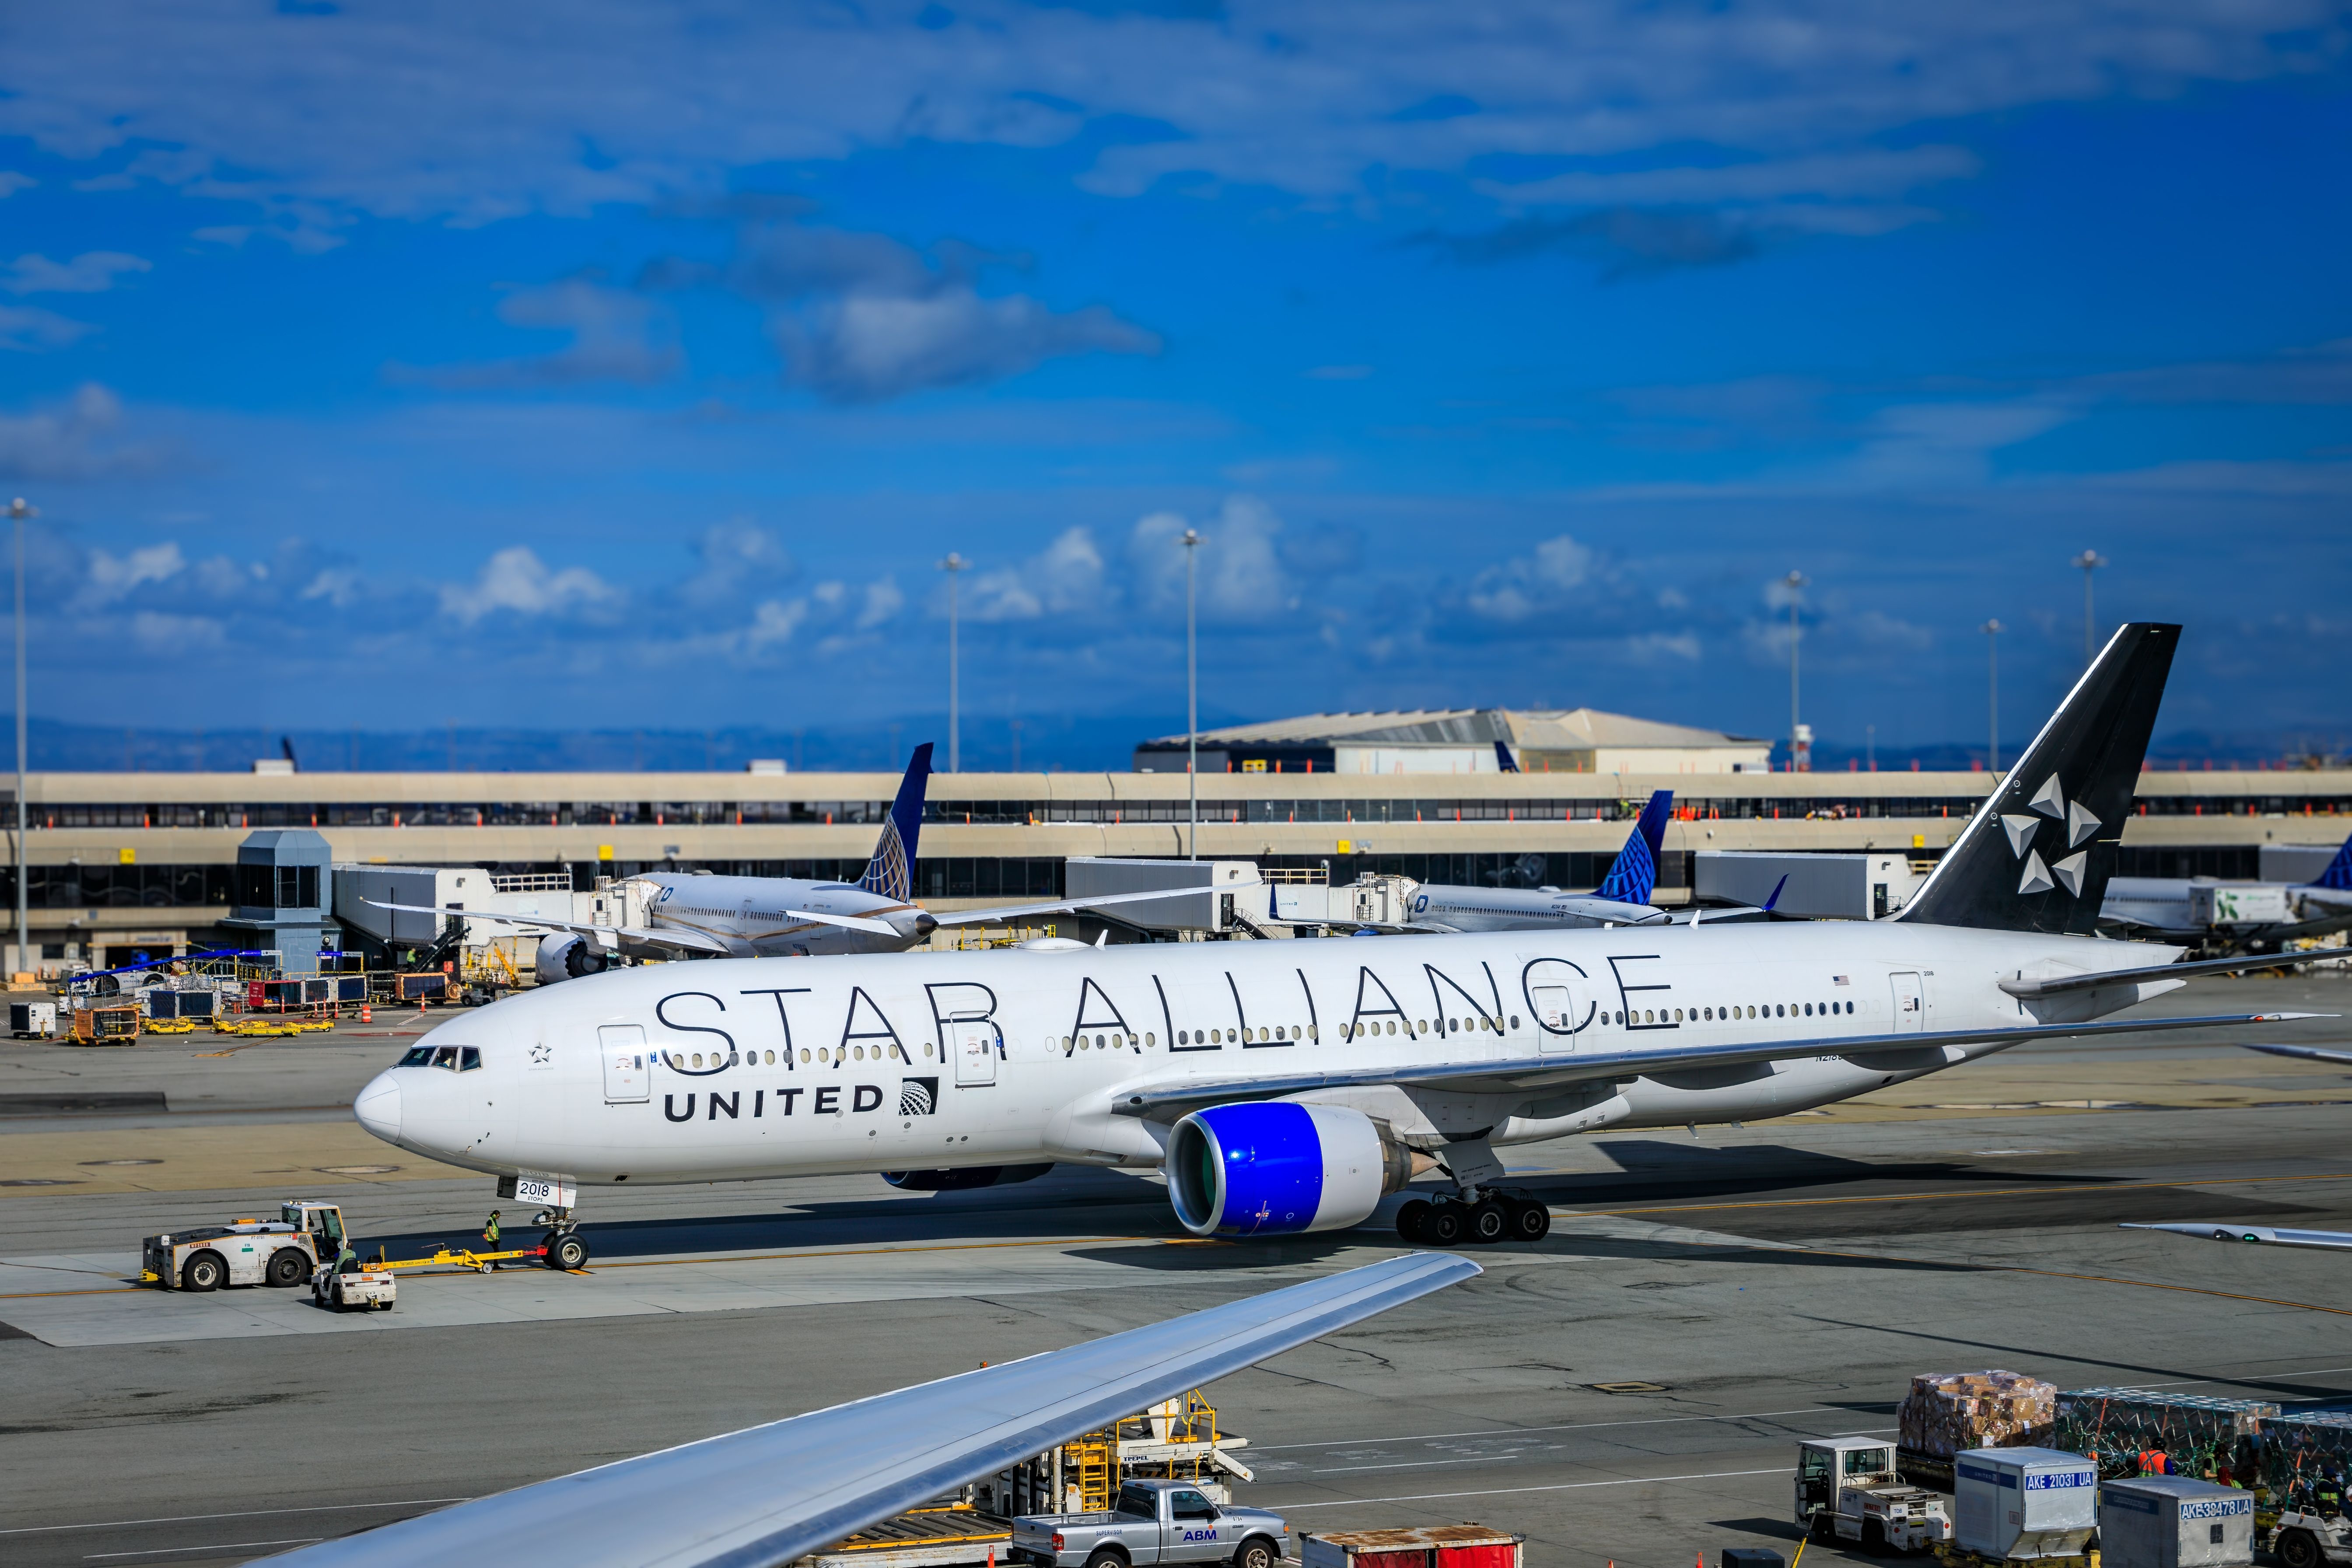 A United Airlines Boeing 777 in a special Star Alliance livery